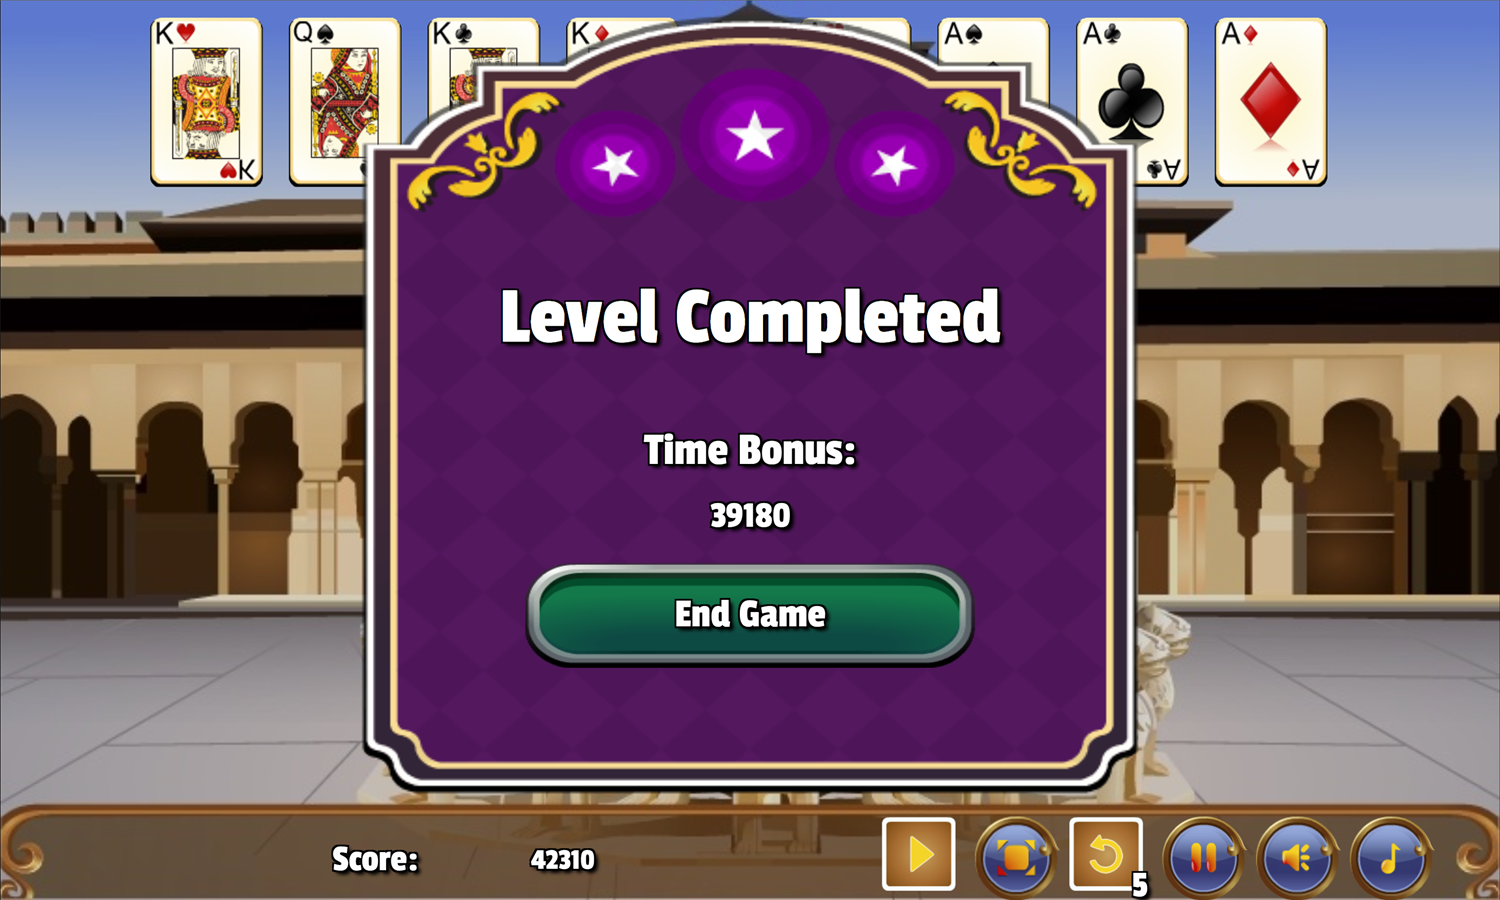 Alhambra Solitaire Game Level Completed Screen Screenshot.